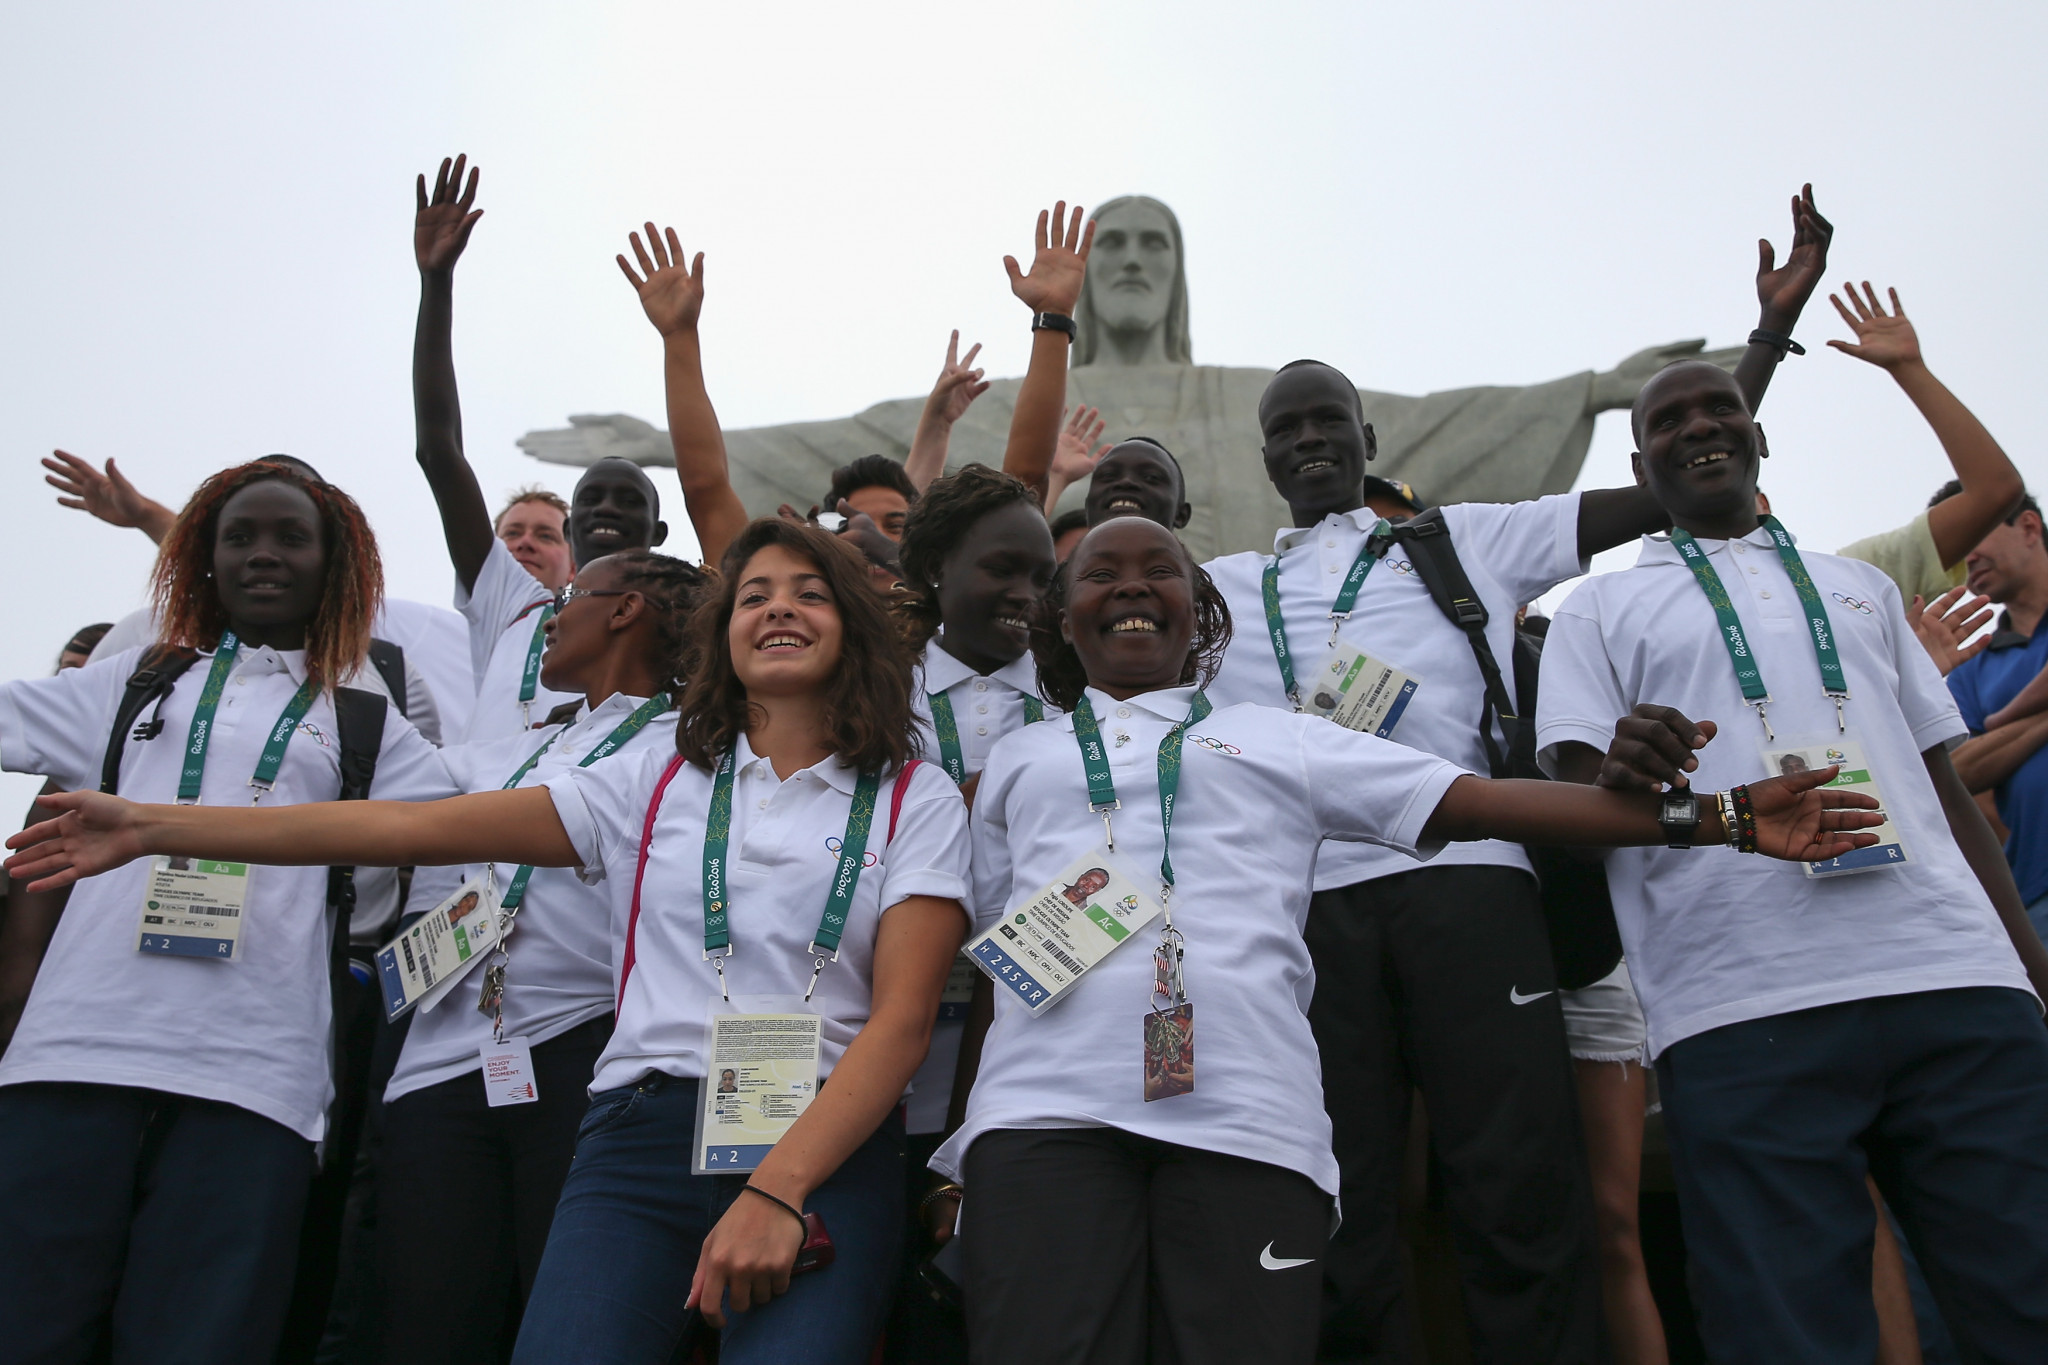 The Refugee Olympic Team debuted at Rio 2016 ©Getty Images  